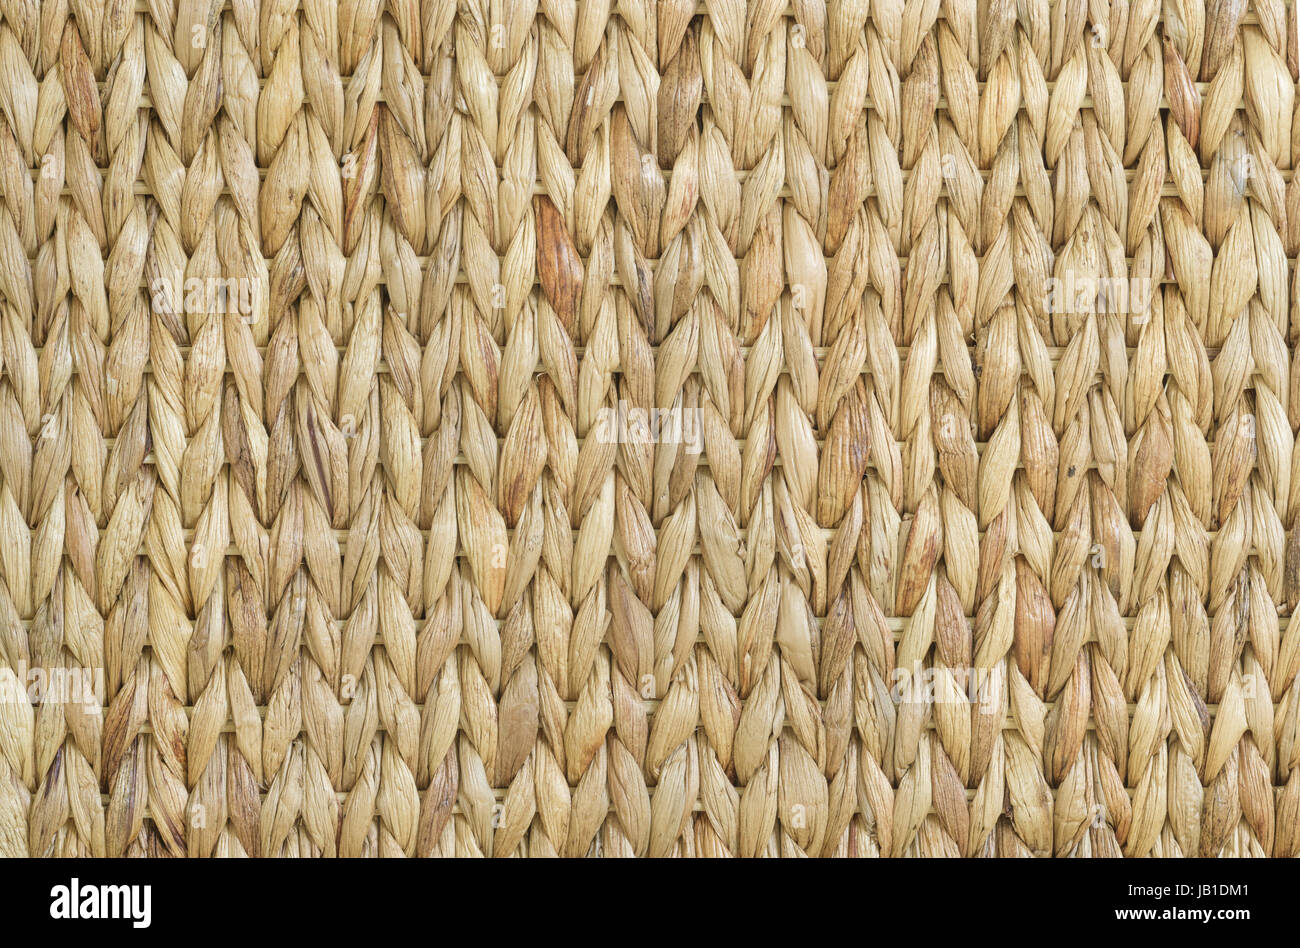 Meshwork of wooden reed wicker texture background Stock Photo